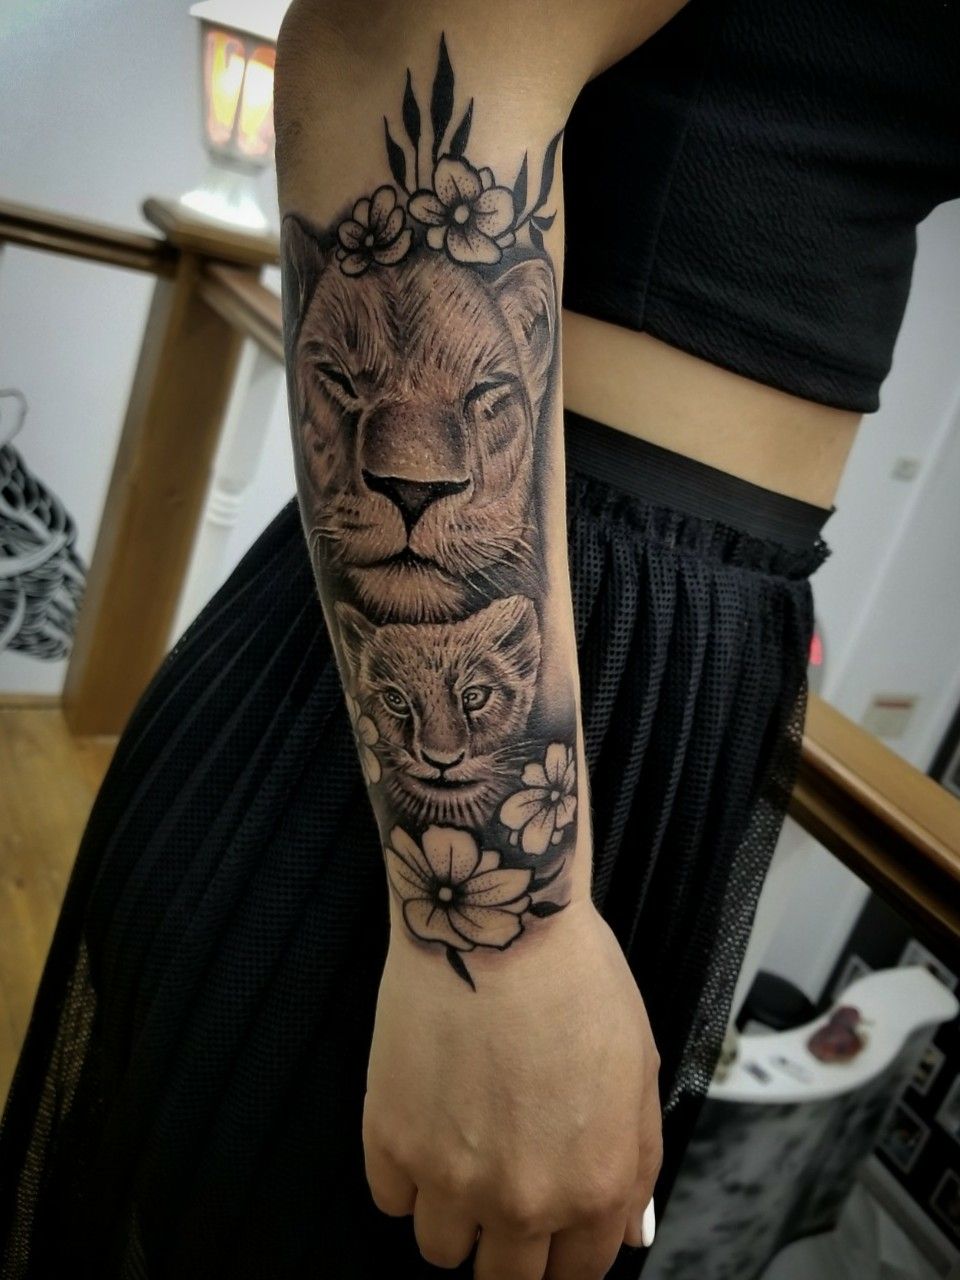 Lion & Lioness Temporary Tattoo Floral Tattoo Flower Tattoo Festival Tattoo  Animal Tattoo His Hers Tattoos for Women, Men, Unisex - Etsy